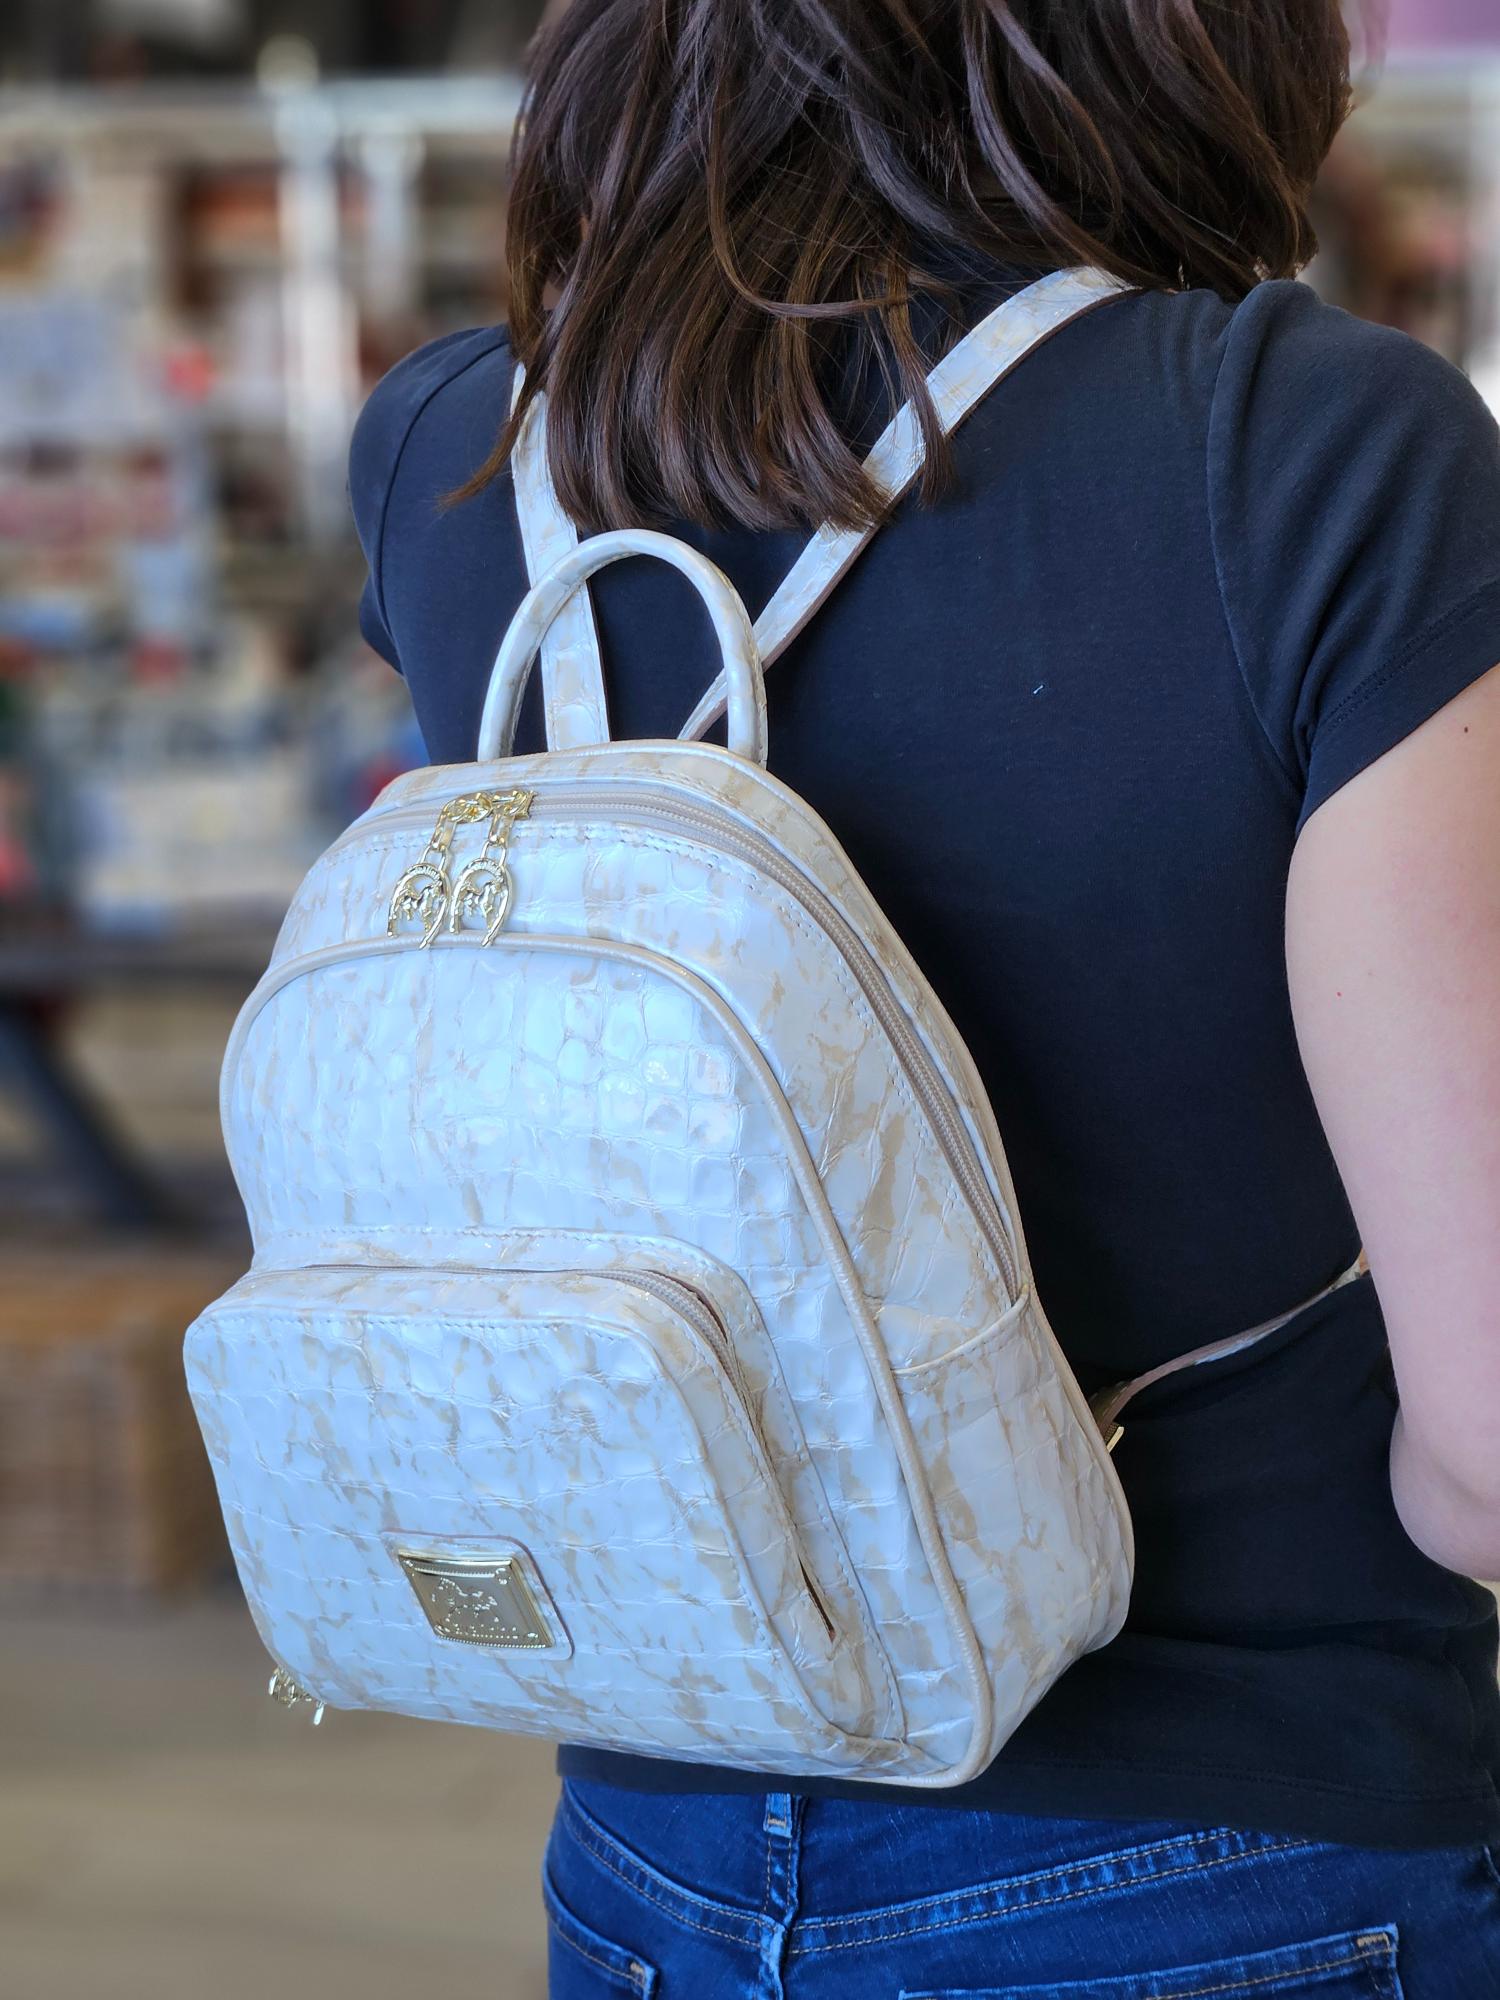 #color_ Beige White | Cavalinho Gallop Patent Leather Backpack - Beige White - 18170525.31_LifeStyle